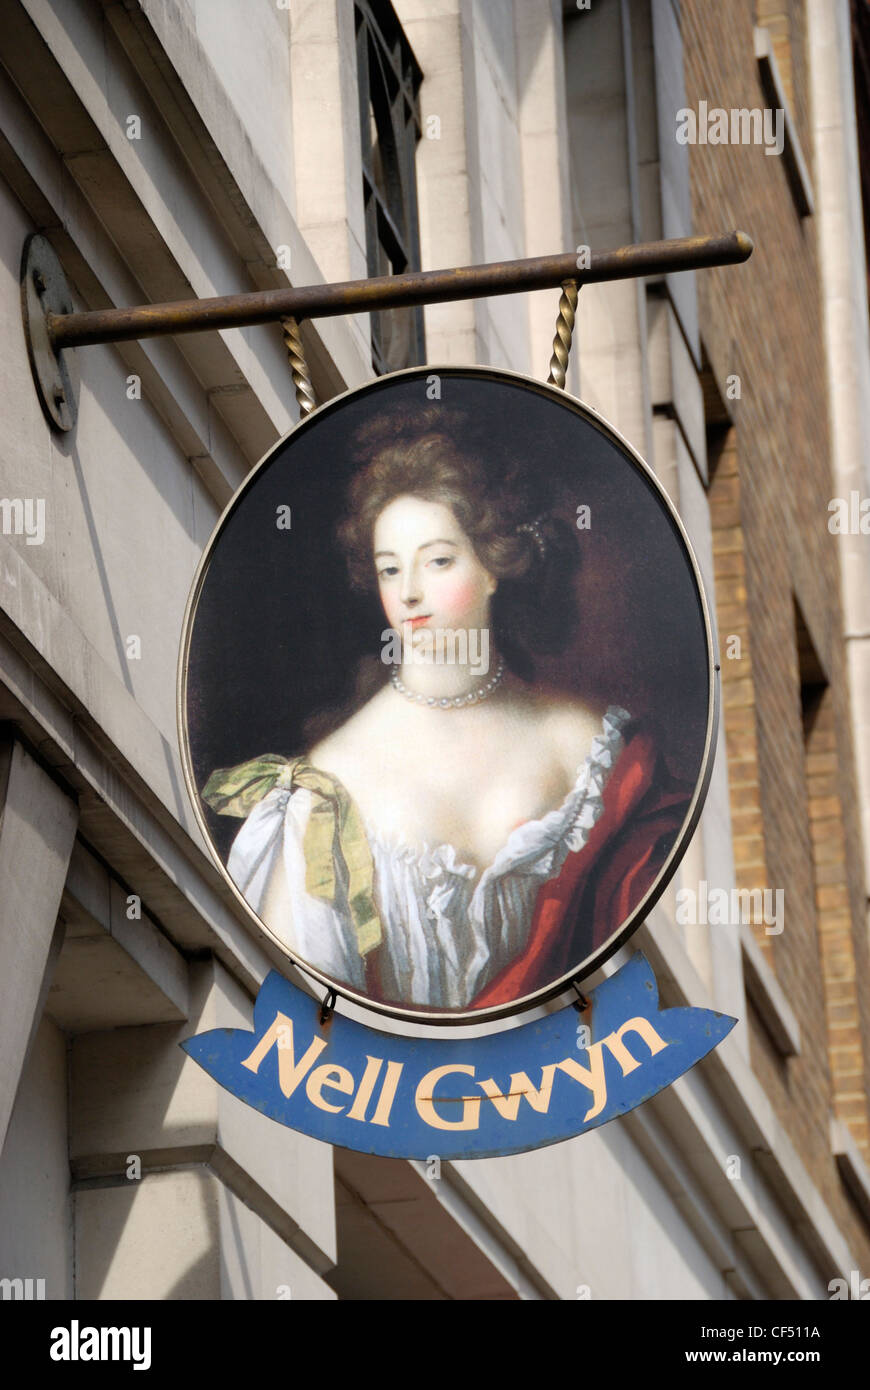 Nell Gwyn tavern sign hanging outside the pub off the Strand in central London. Stock Photo